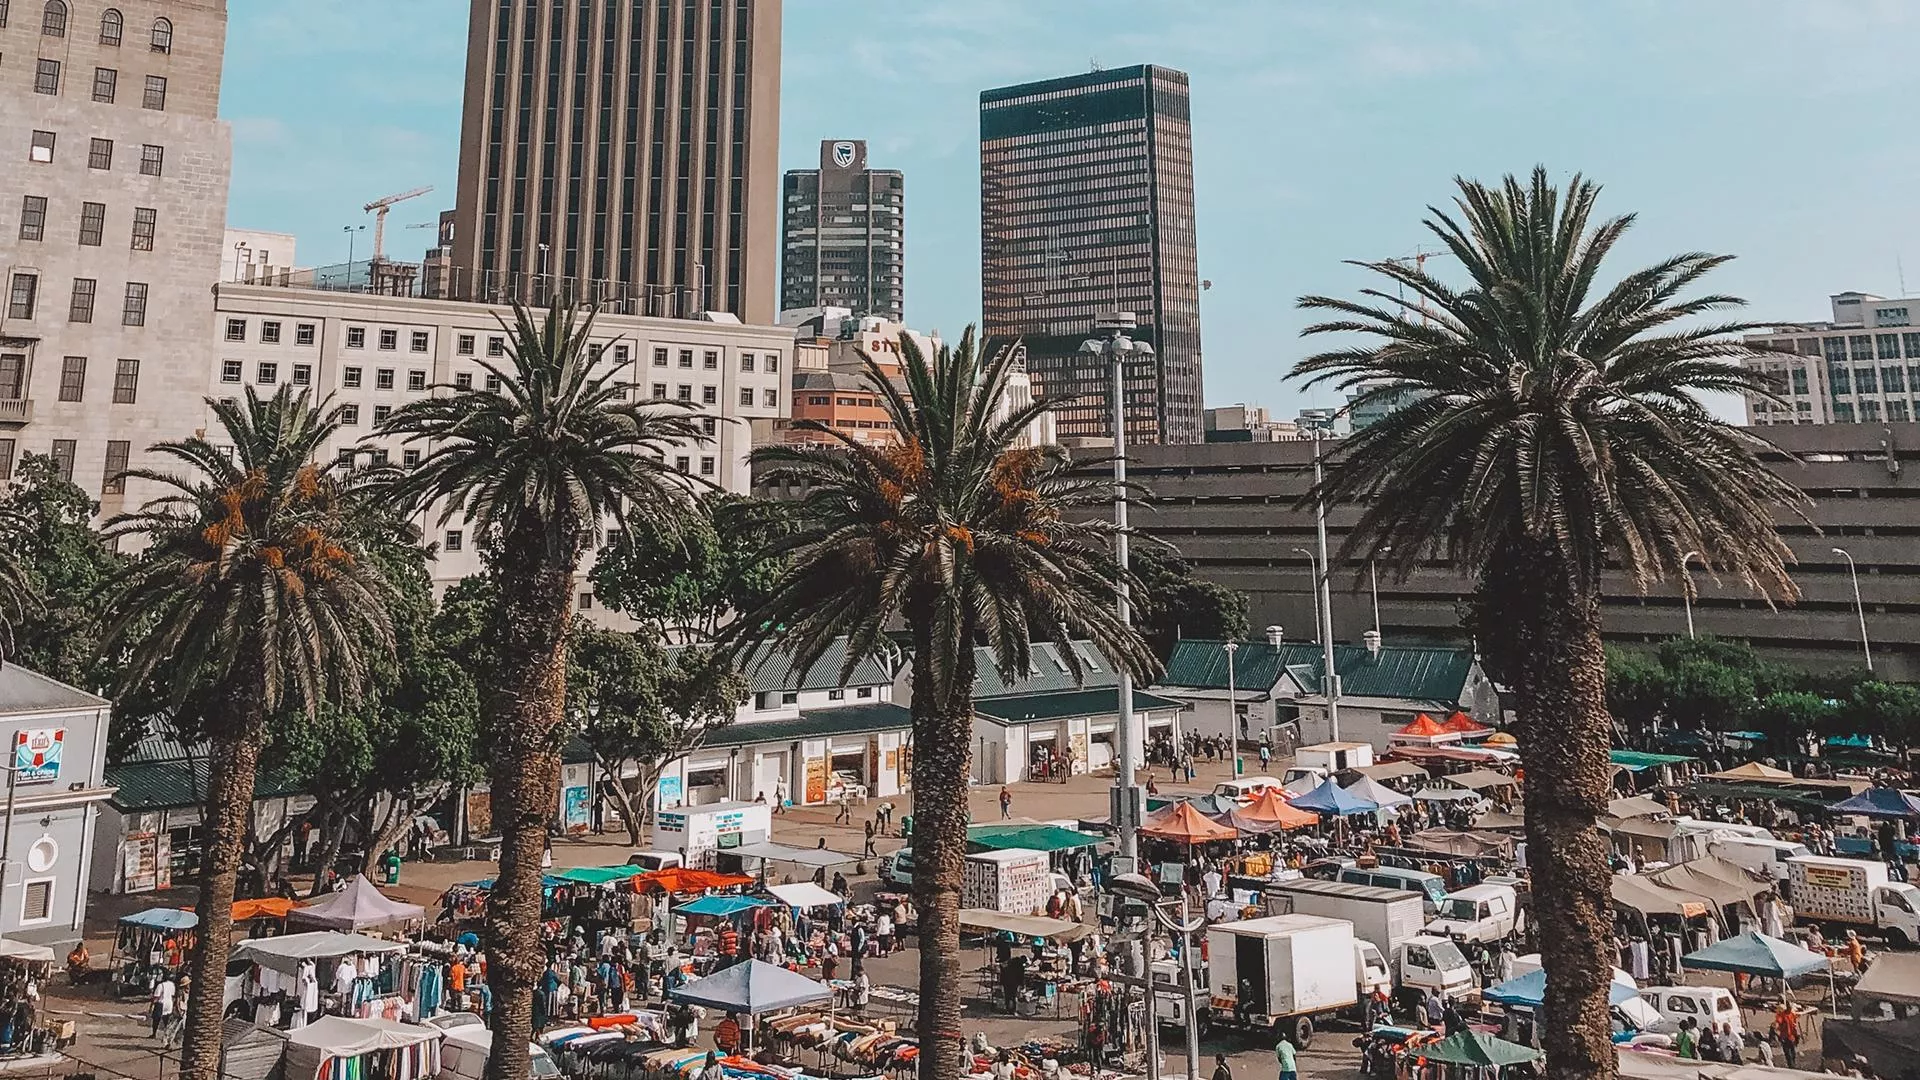 Market in Cape Town, South Africa. Photo by Ian Badenhorst on Unsplash